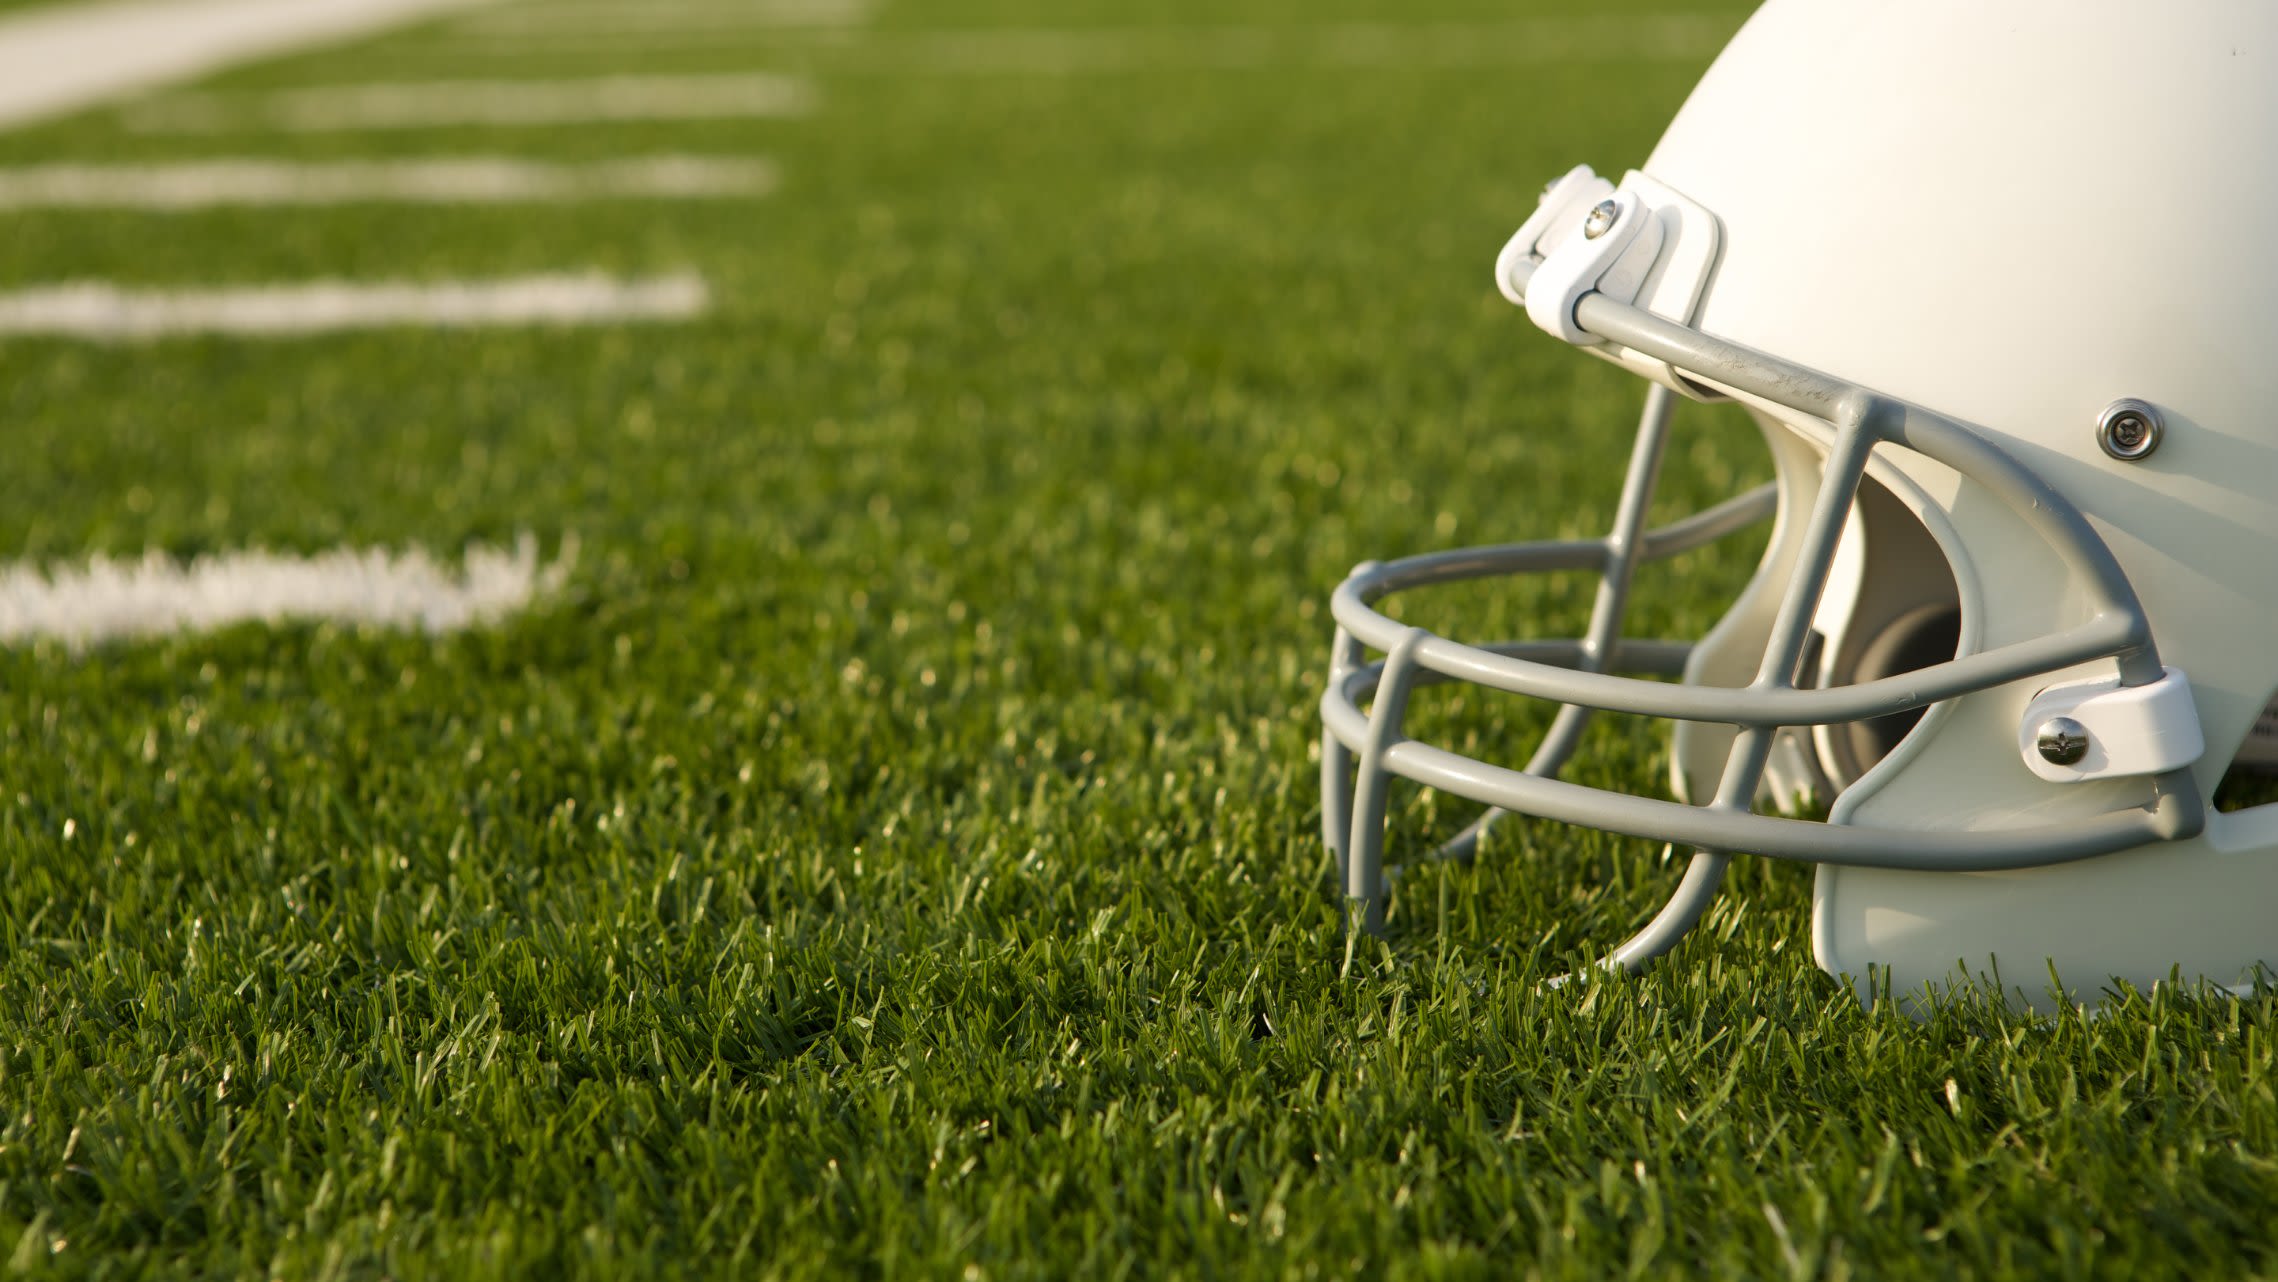 NFL Players to Wear On-Field Tracking Devices in 2014